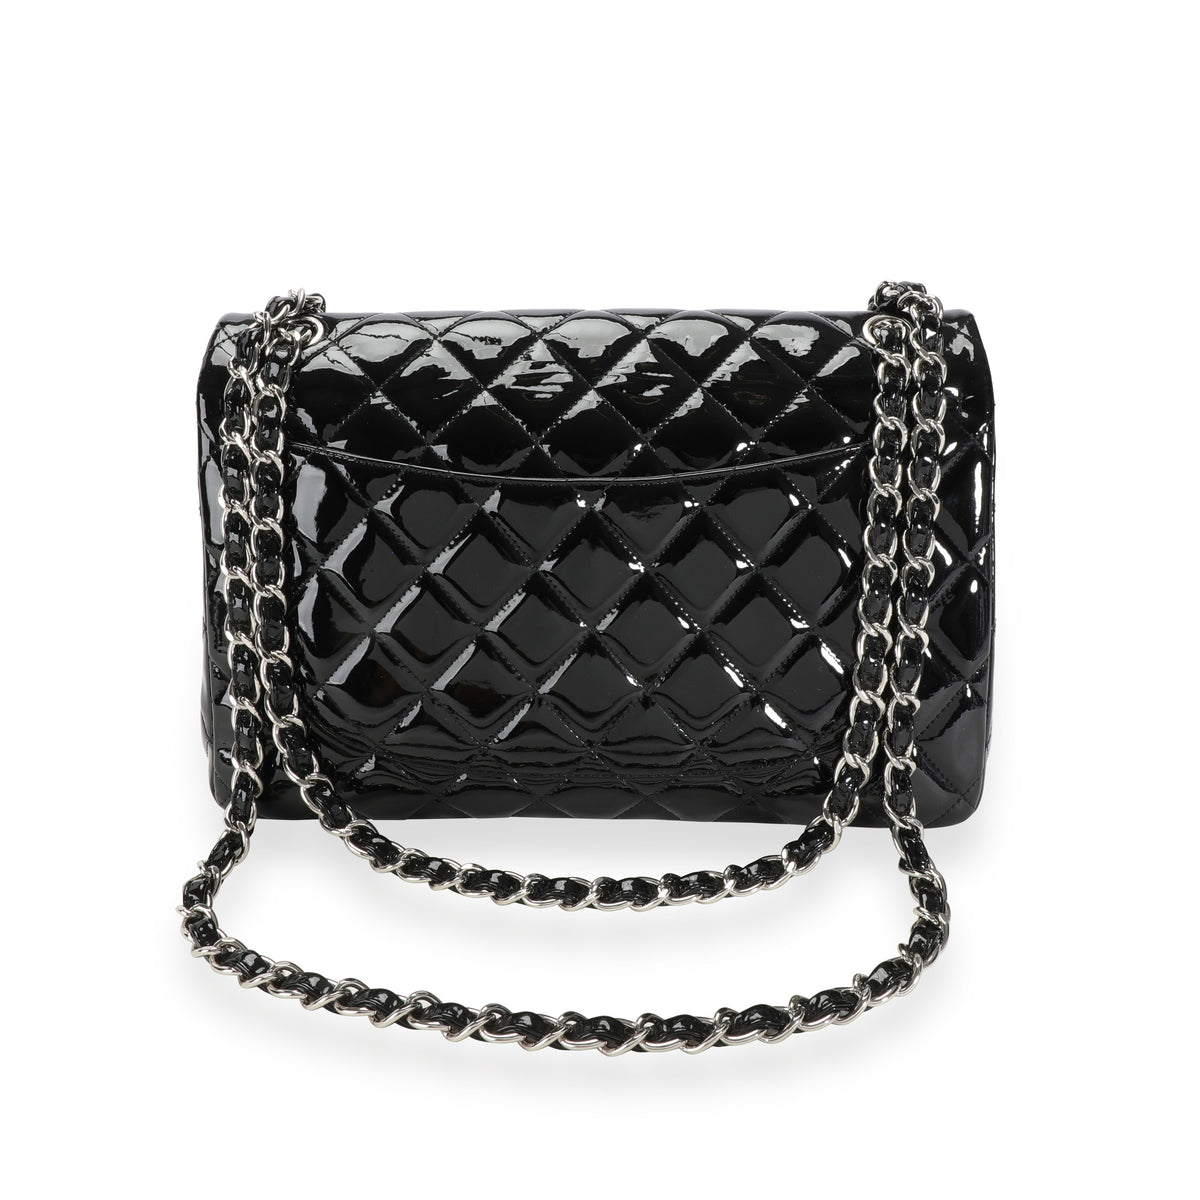 Chanel Black Quilted Patent Leather Jumbo Classic Double Flap Bag, myGemma